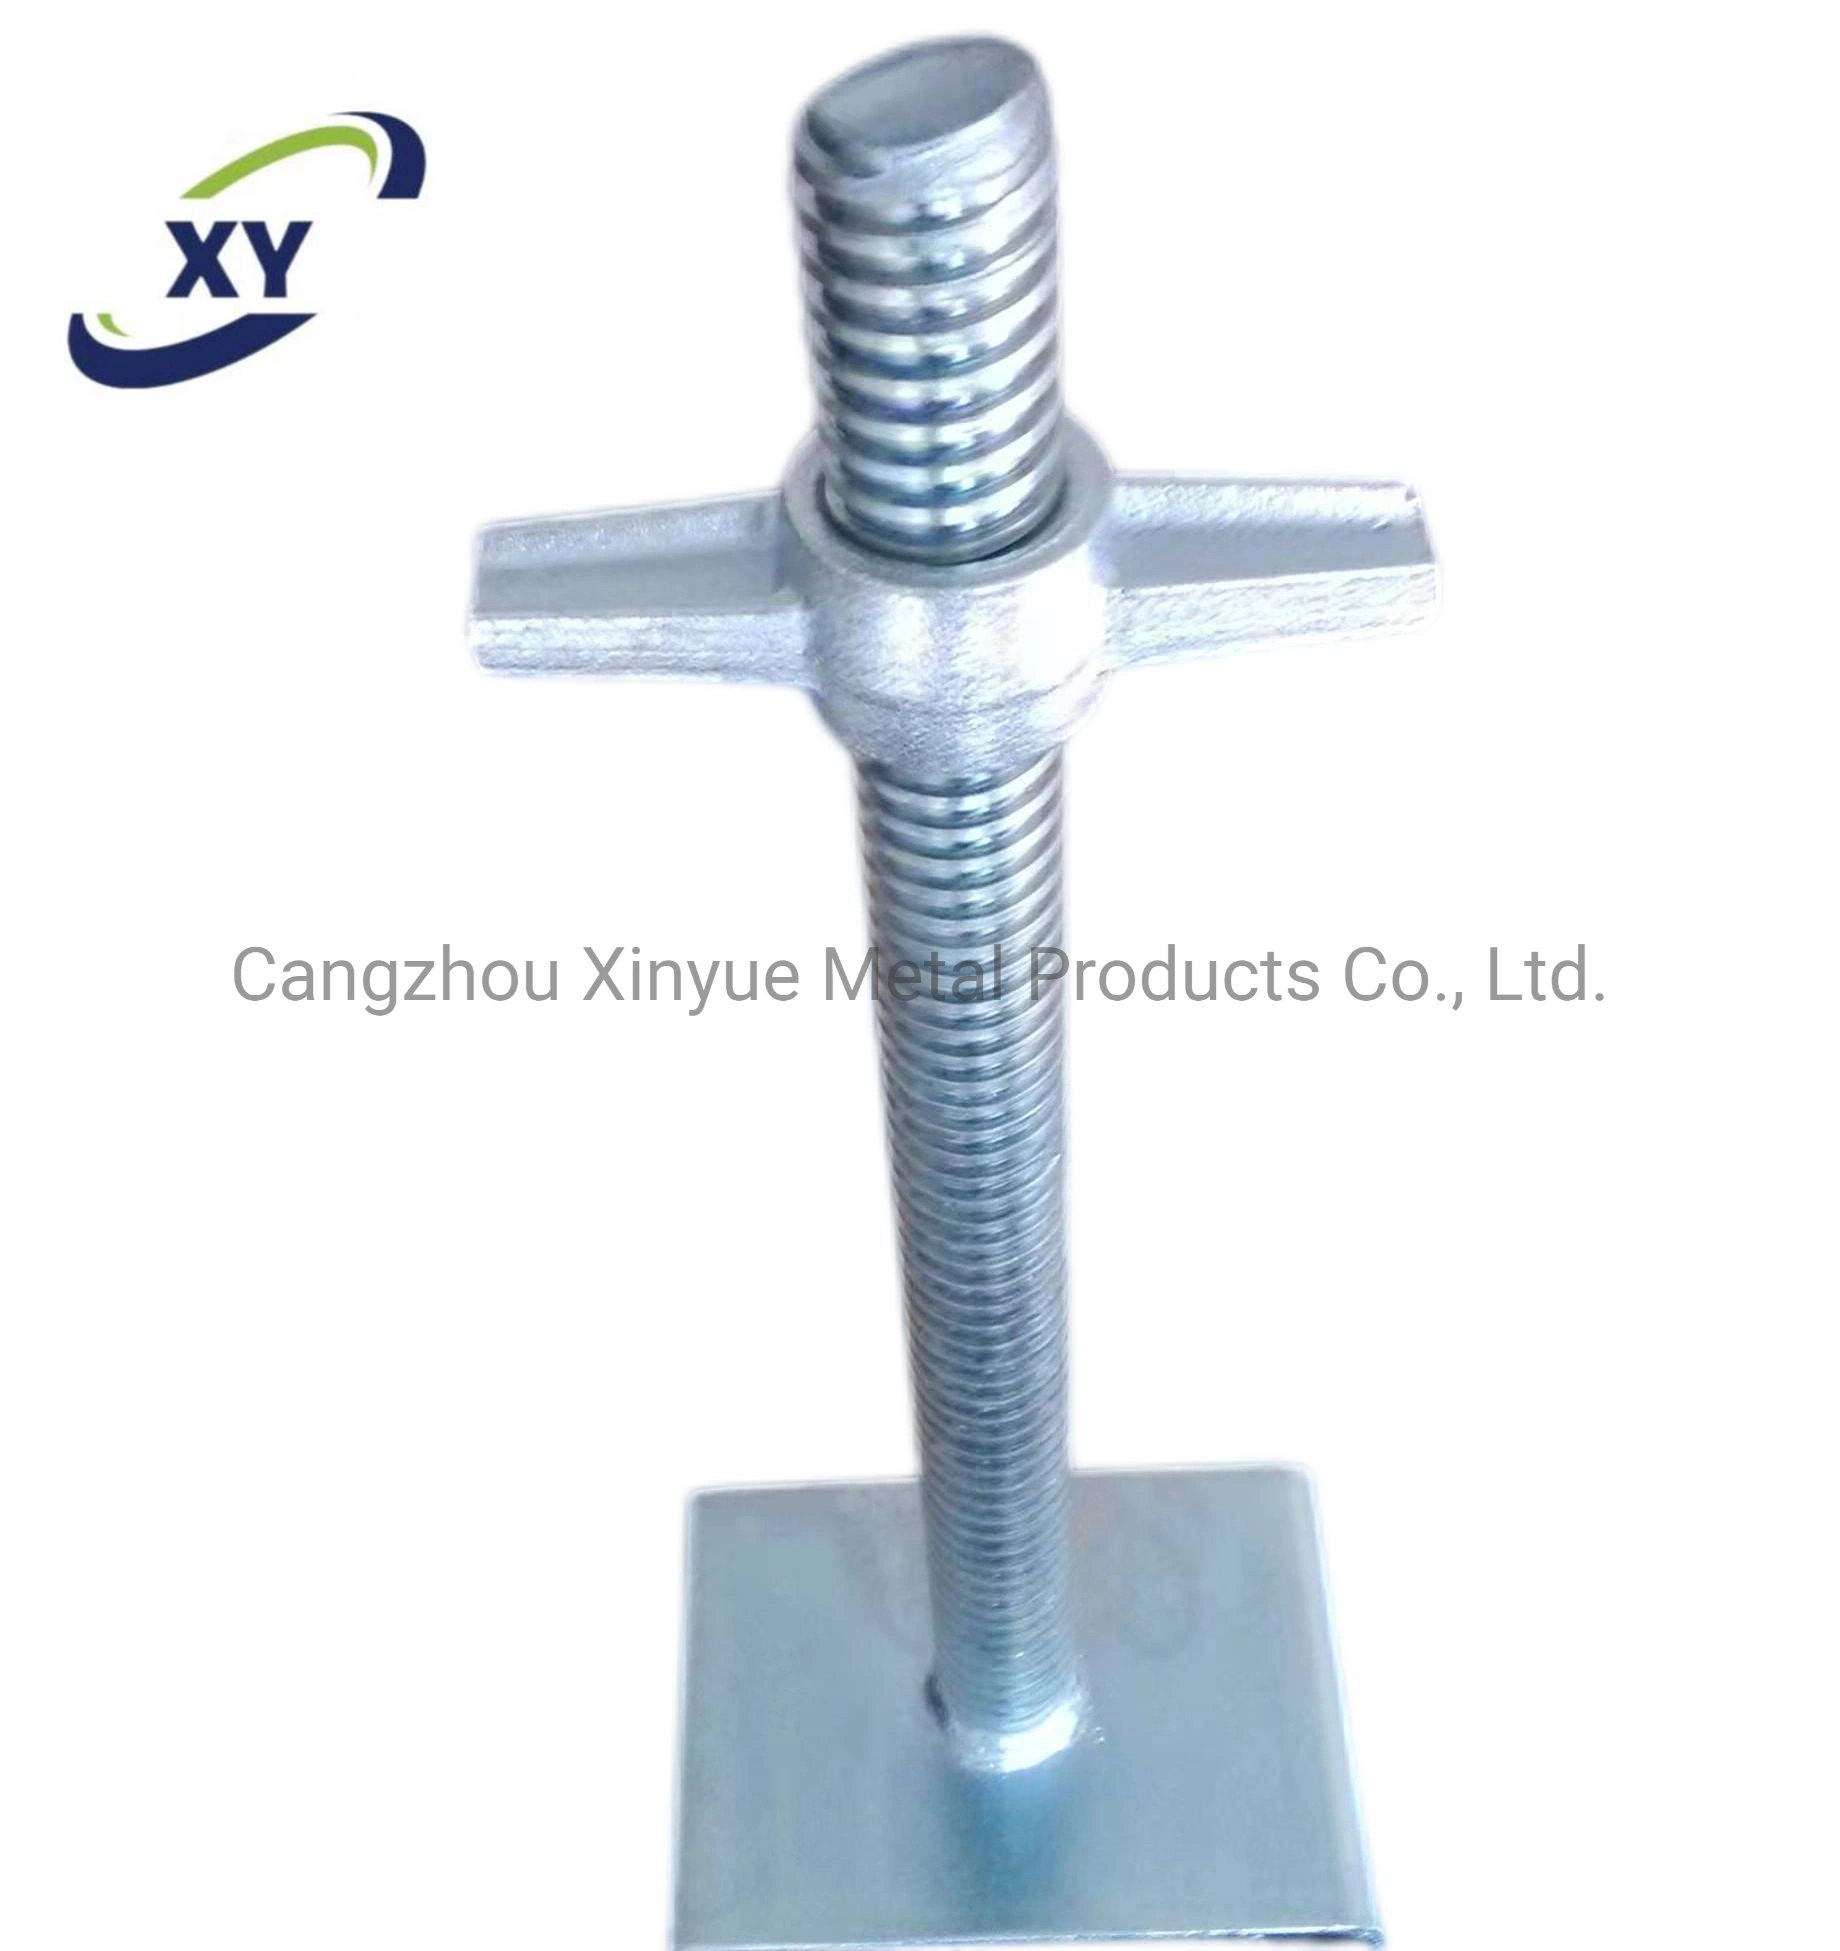 Scaffolding/Scaffold Adjustable Acrow Steel Prop Base Jack Construction Building Material Made in China